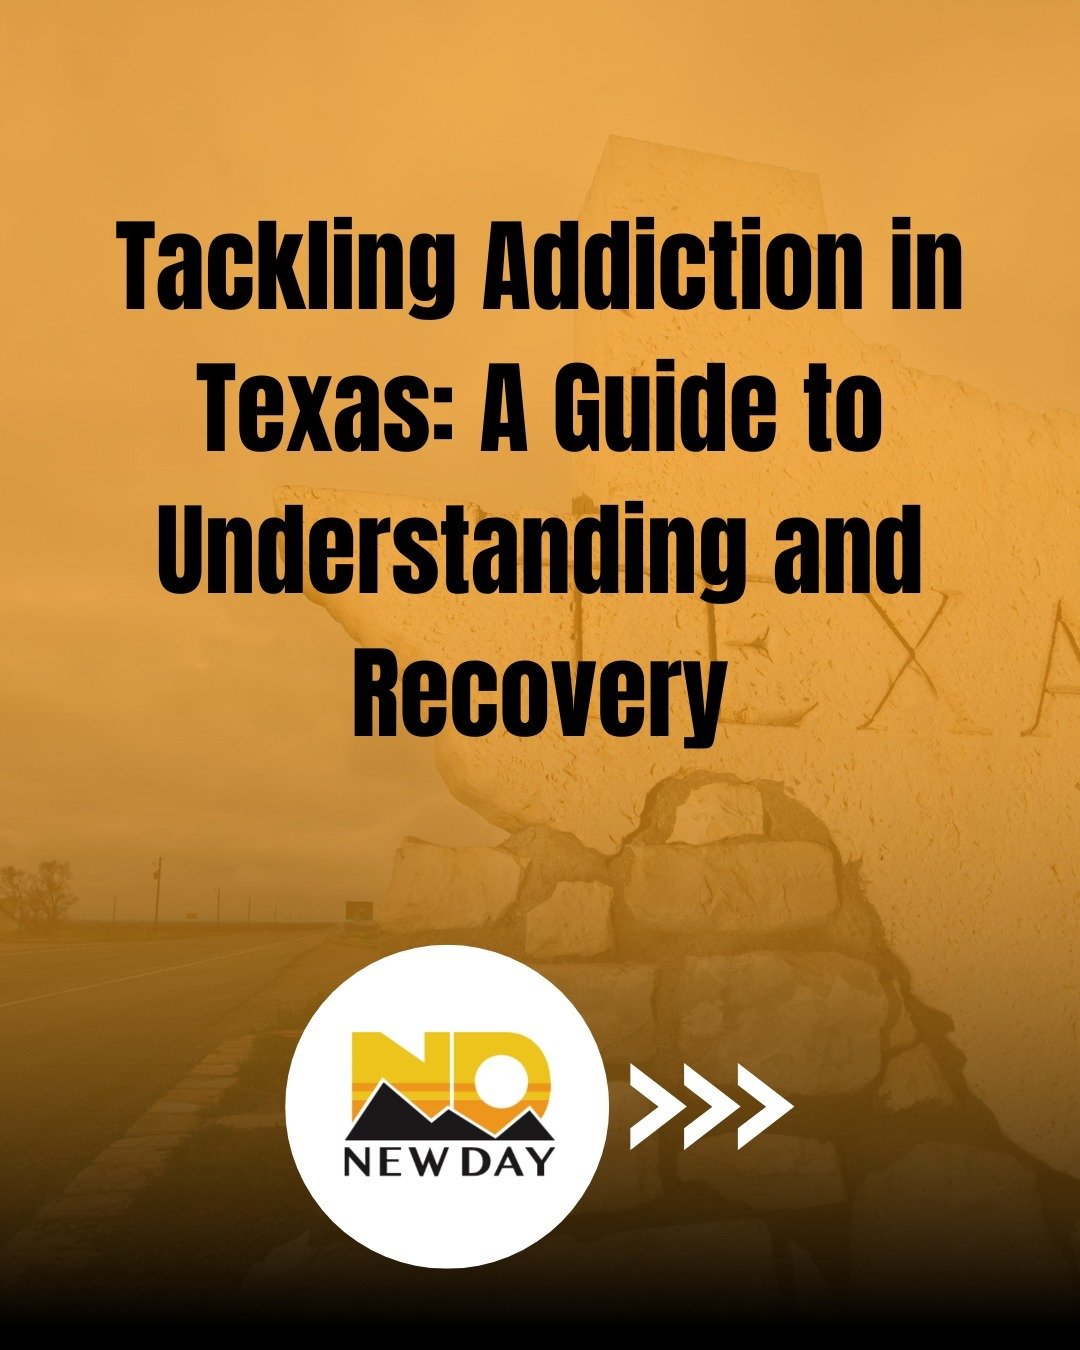 Swipe to learn about addiction and how it's showing up in Texas.

#newday #contactus #support #showingup #unitedstates #swipe #showing #showup #addiction #texas